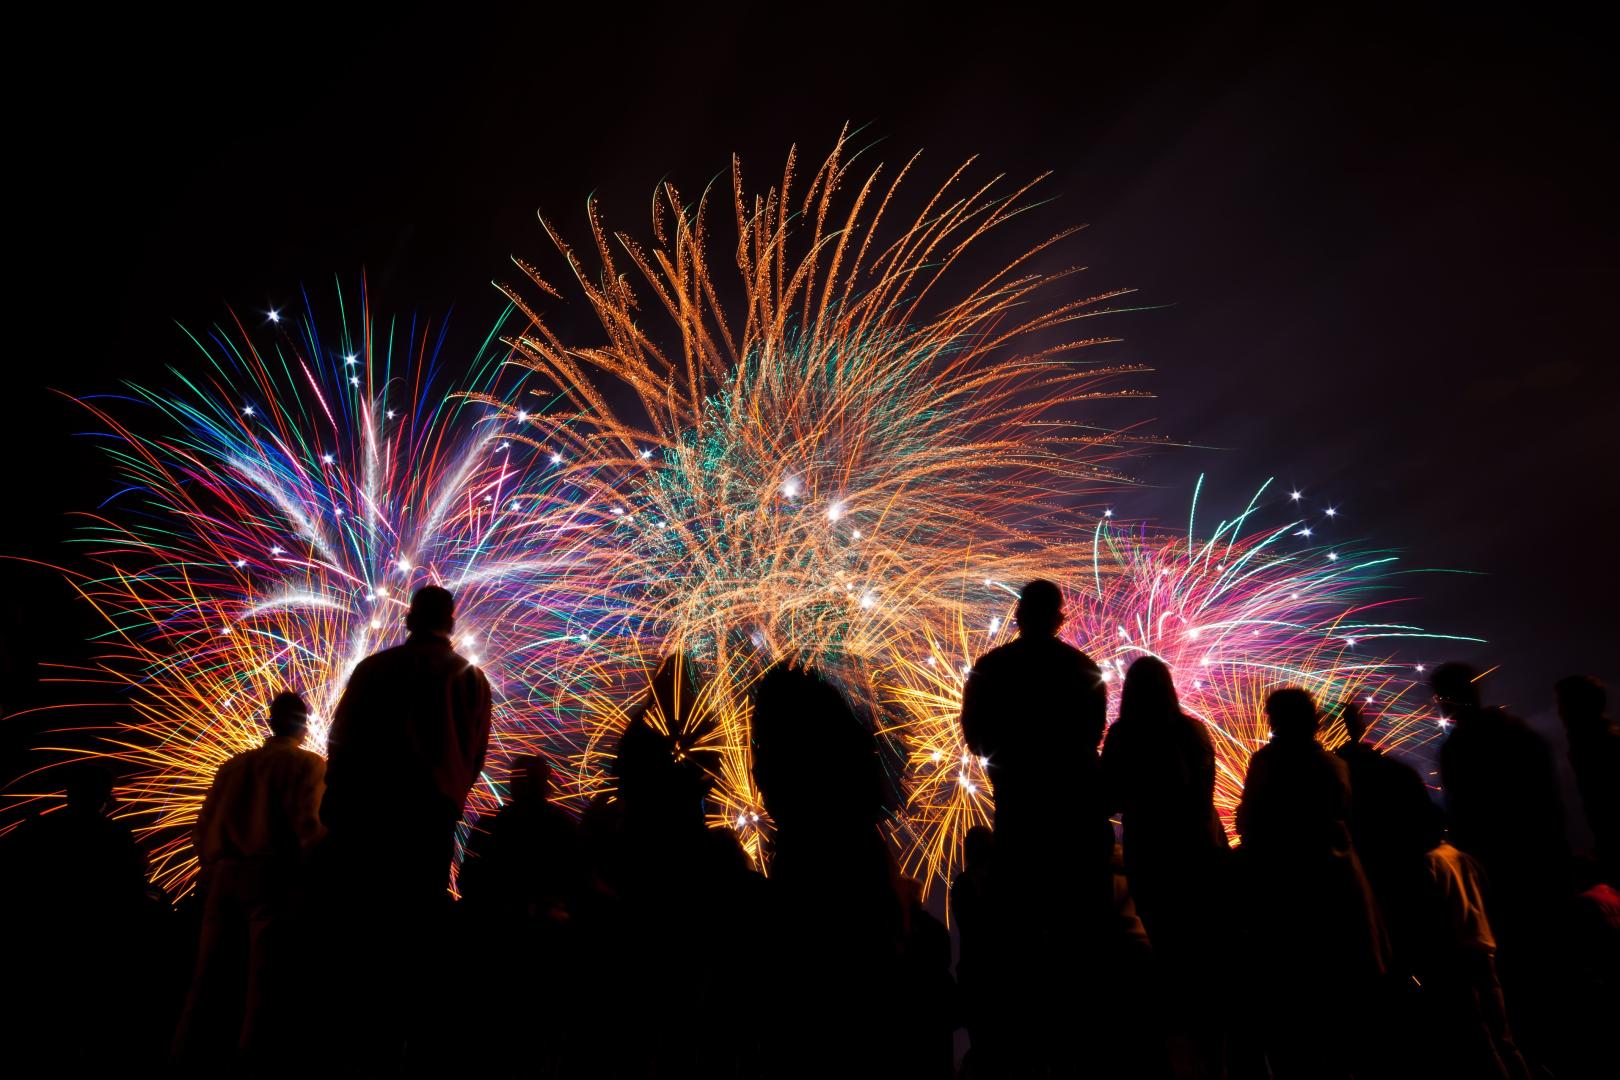 Colourful Fireworks with Silhouettes